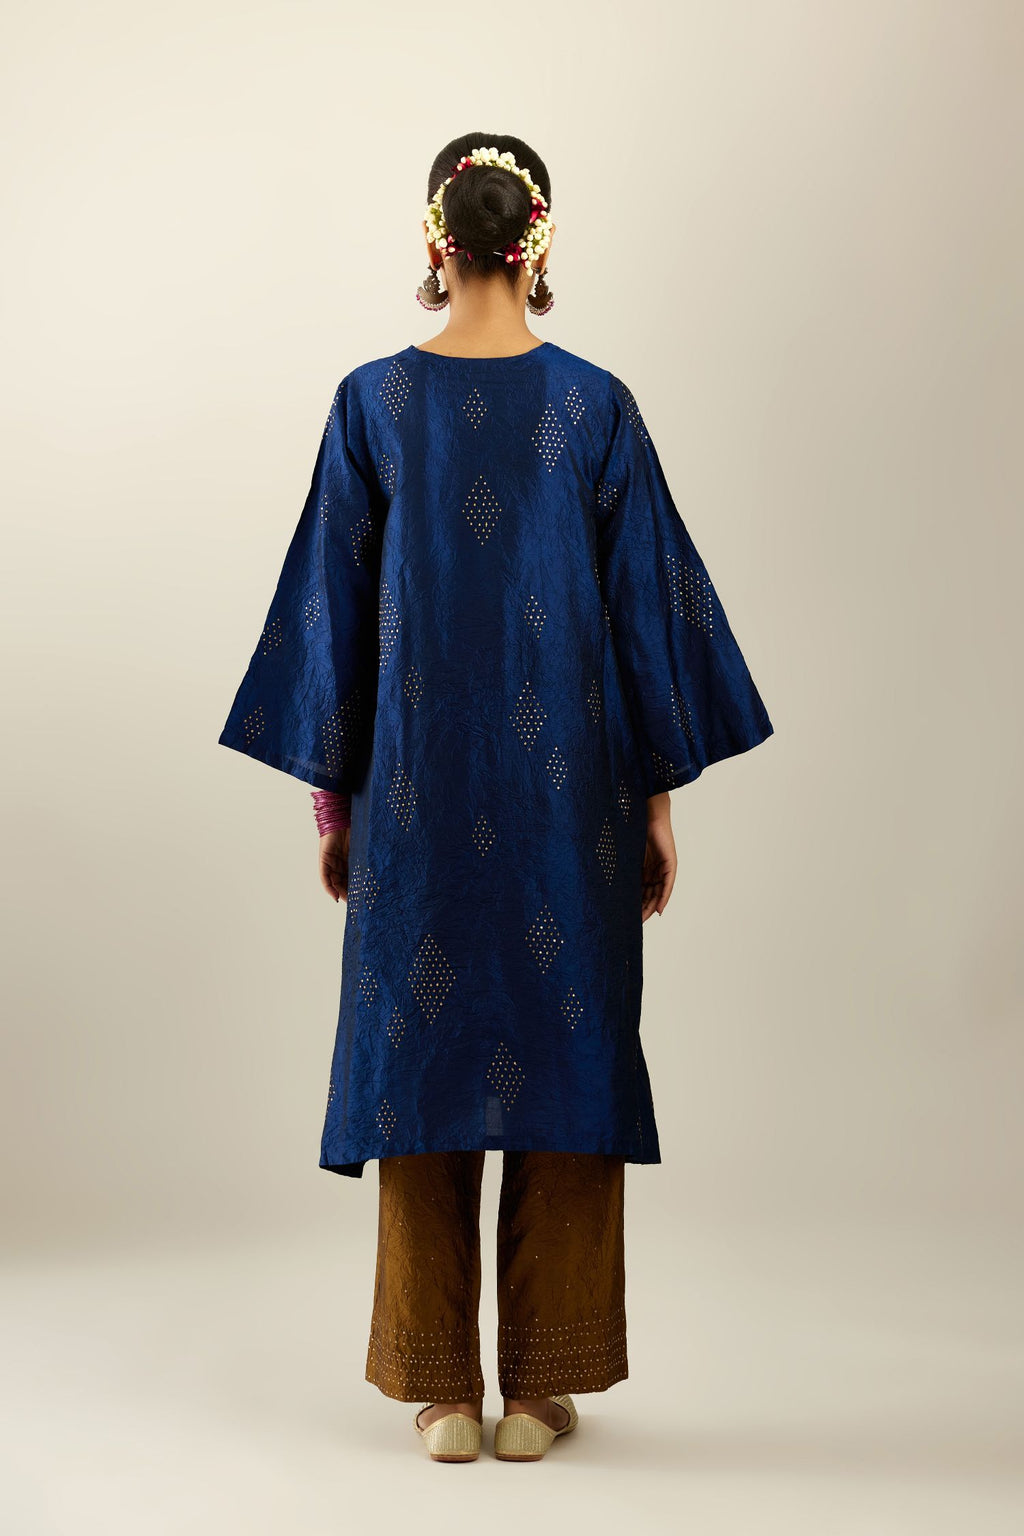 Navy blue silk hand crushed easy fit straight hem kurta, highlighted with all-over gold sequins in diamond shape, paired with golden olive hand crushed pure silk straight pants with gold sequins at hem in horizontal lines formation and side pockets.